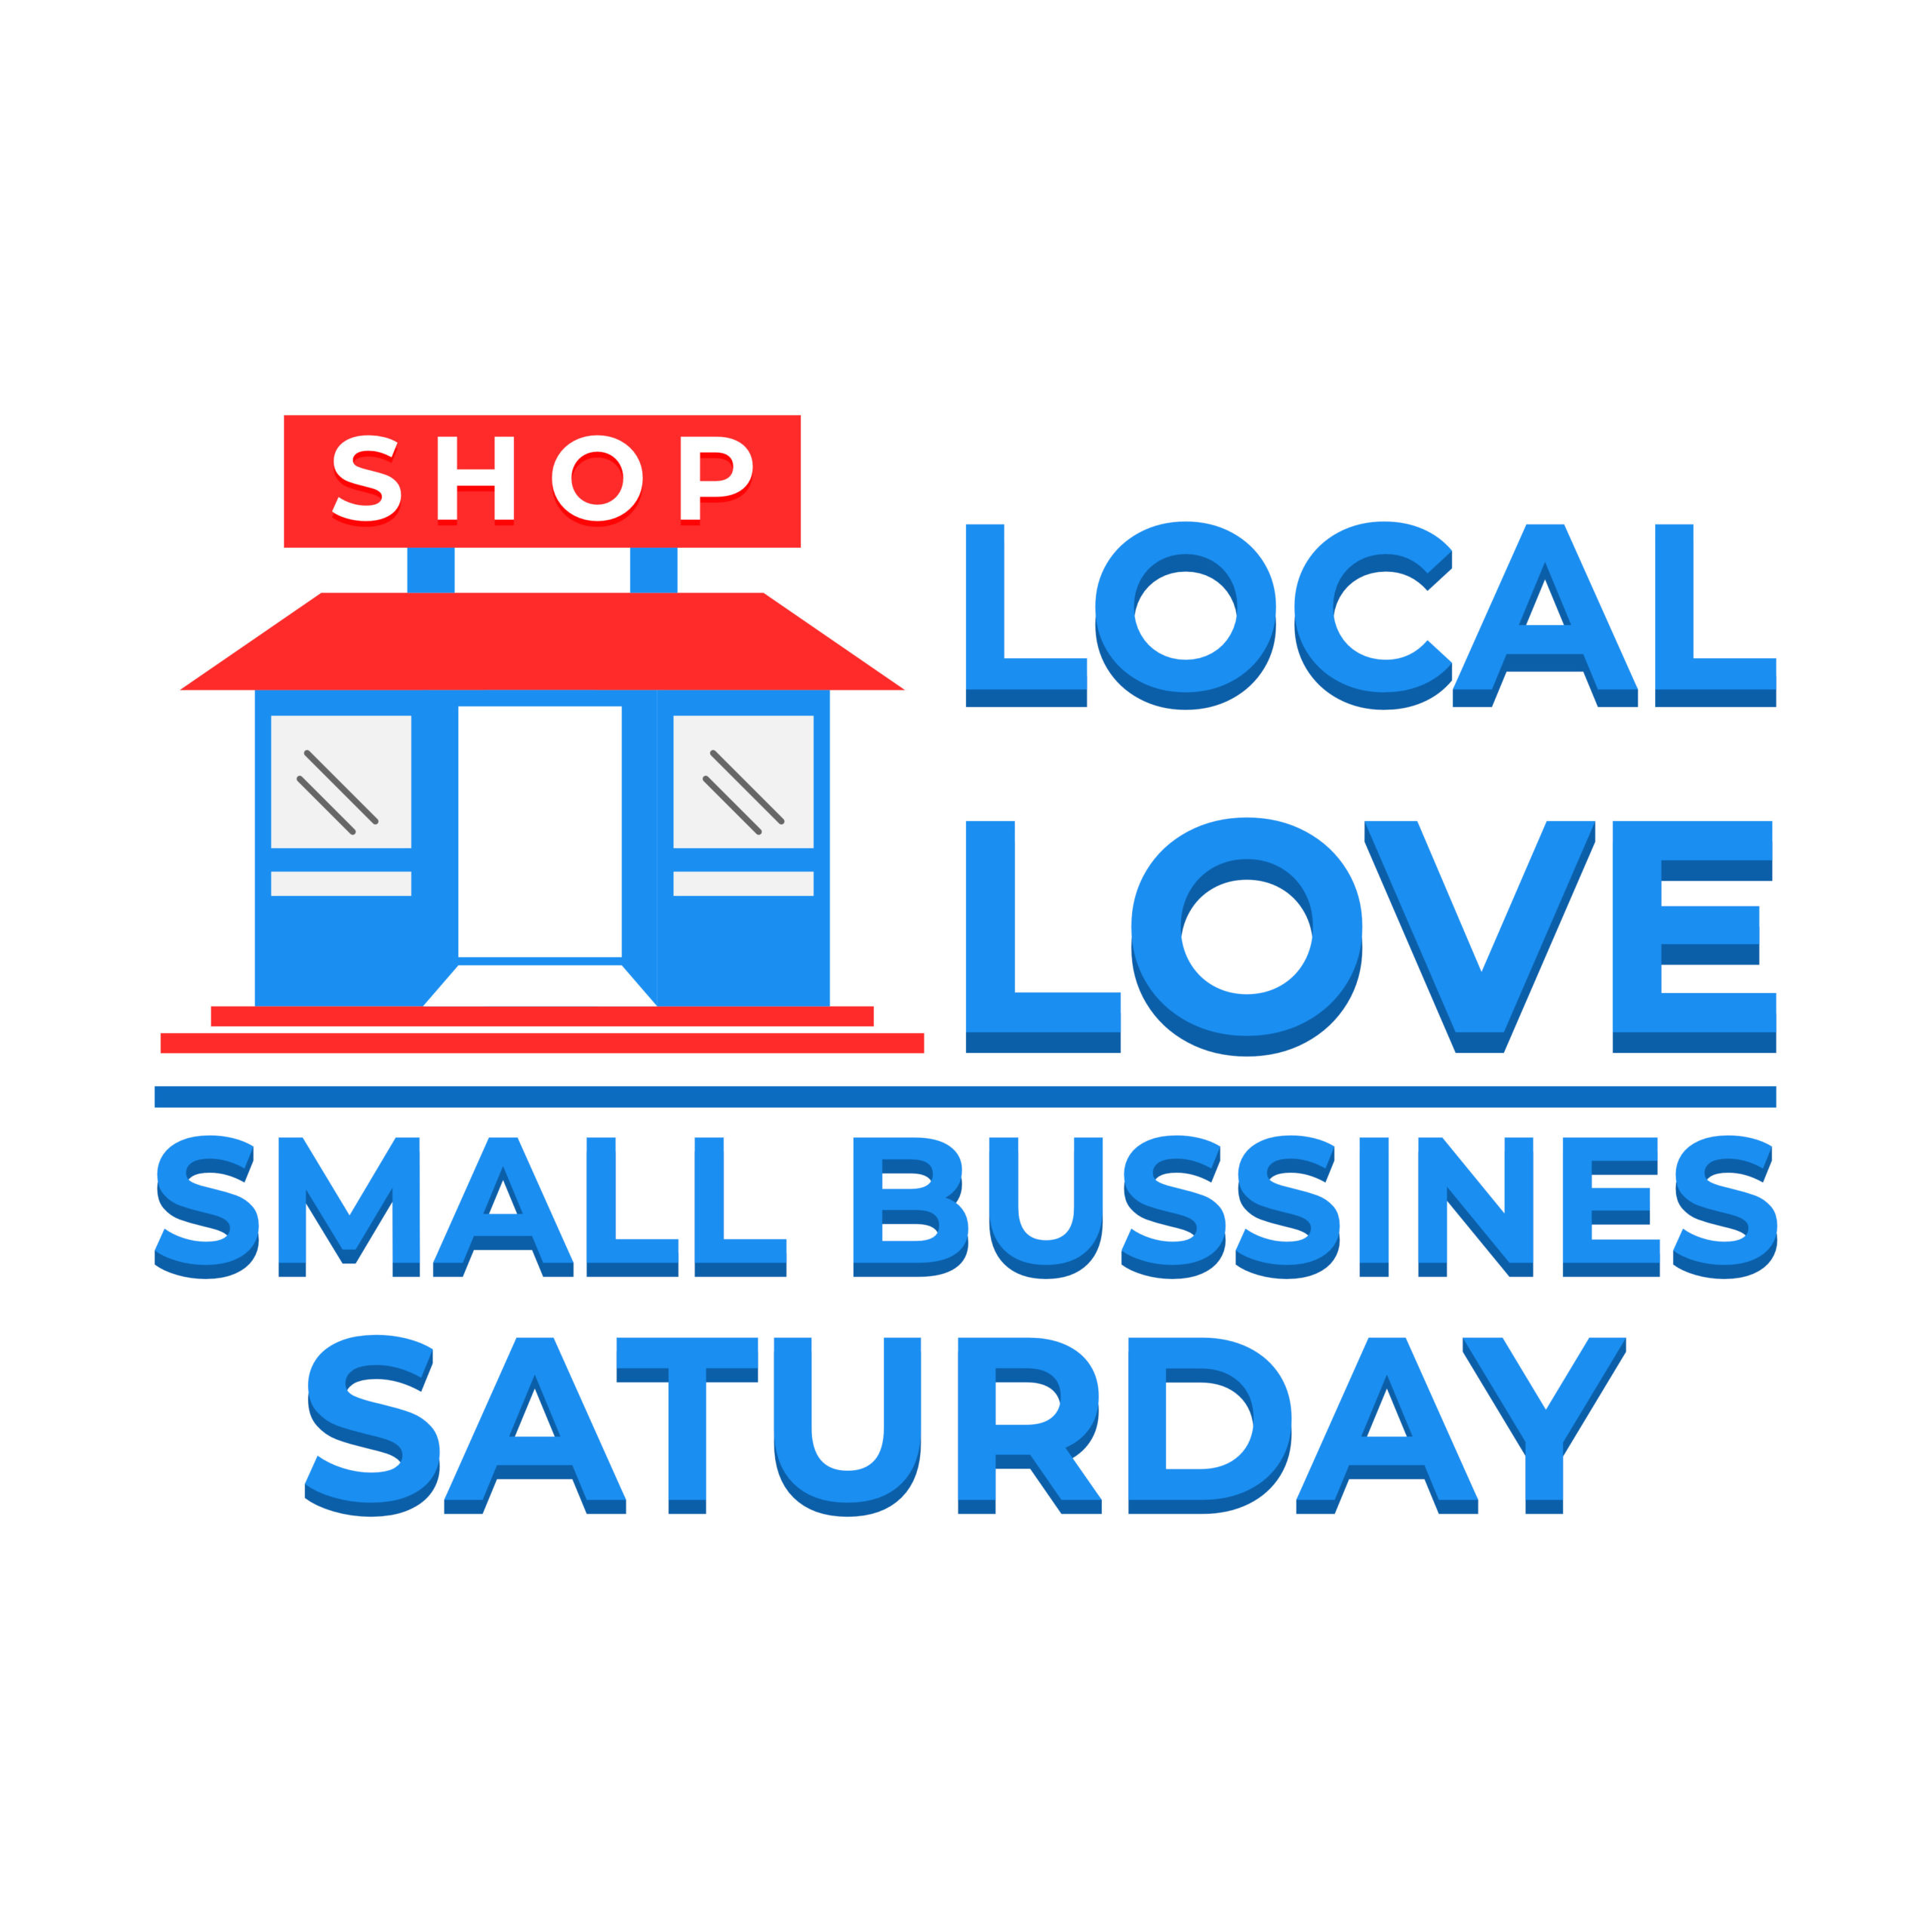 Small Business Saturday 2022 Quotes, Images, Sayings, Wishes, Messages, Greetings, Posters, Cliparts, and Instagram Captions